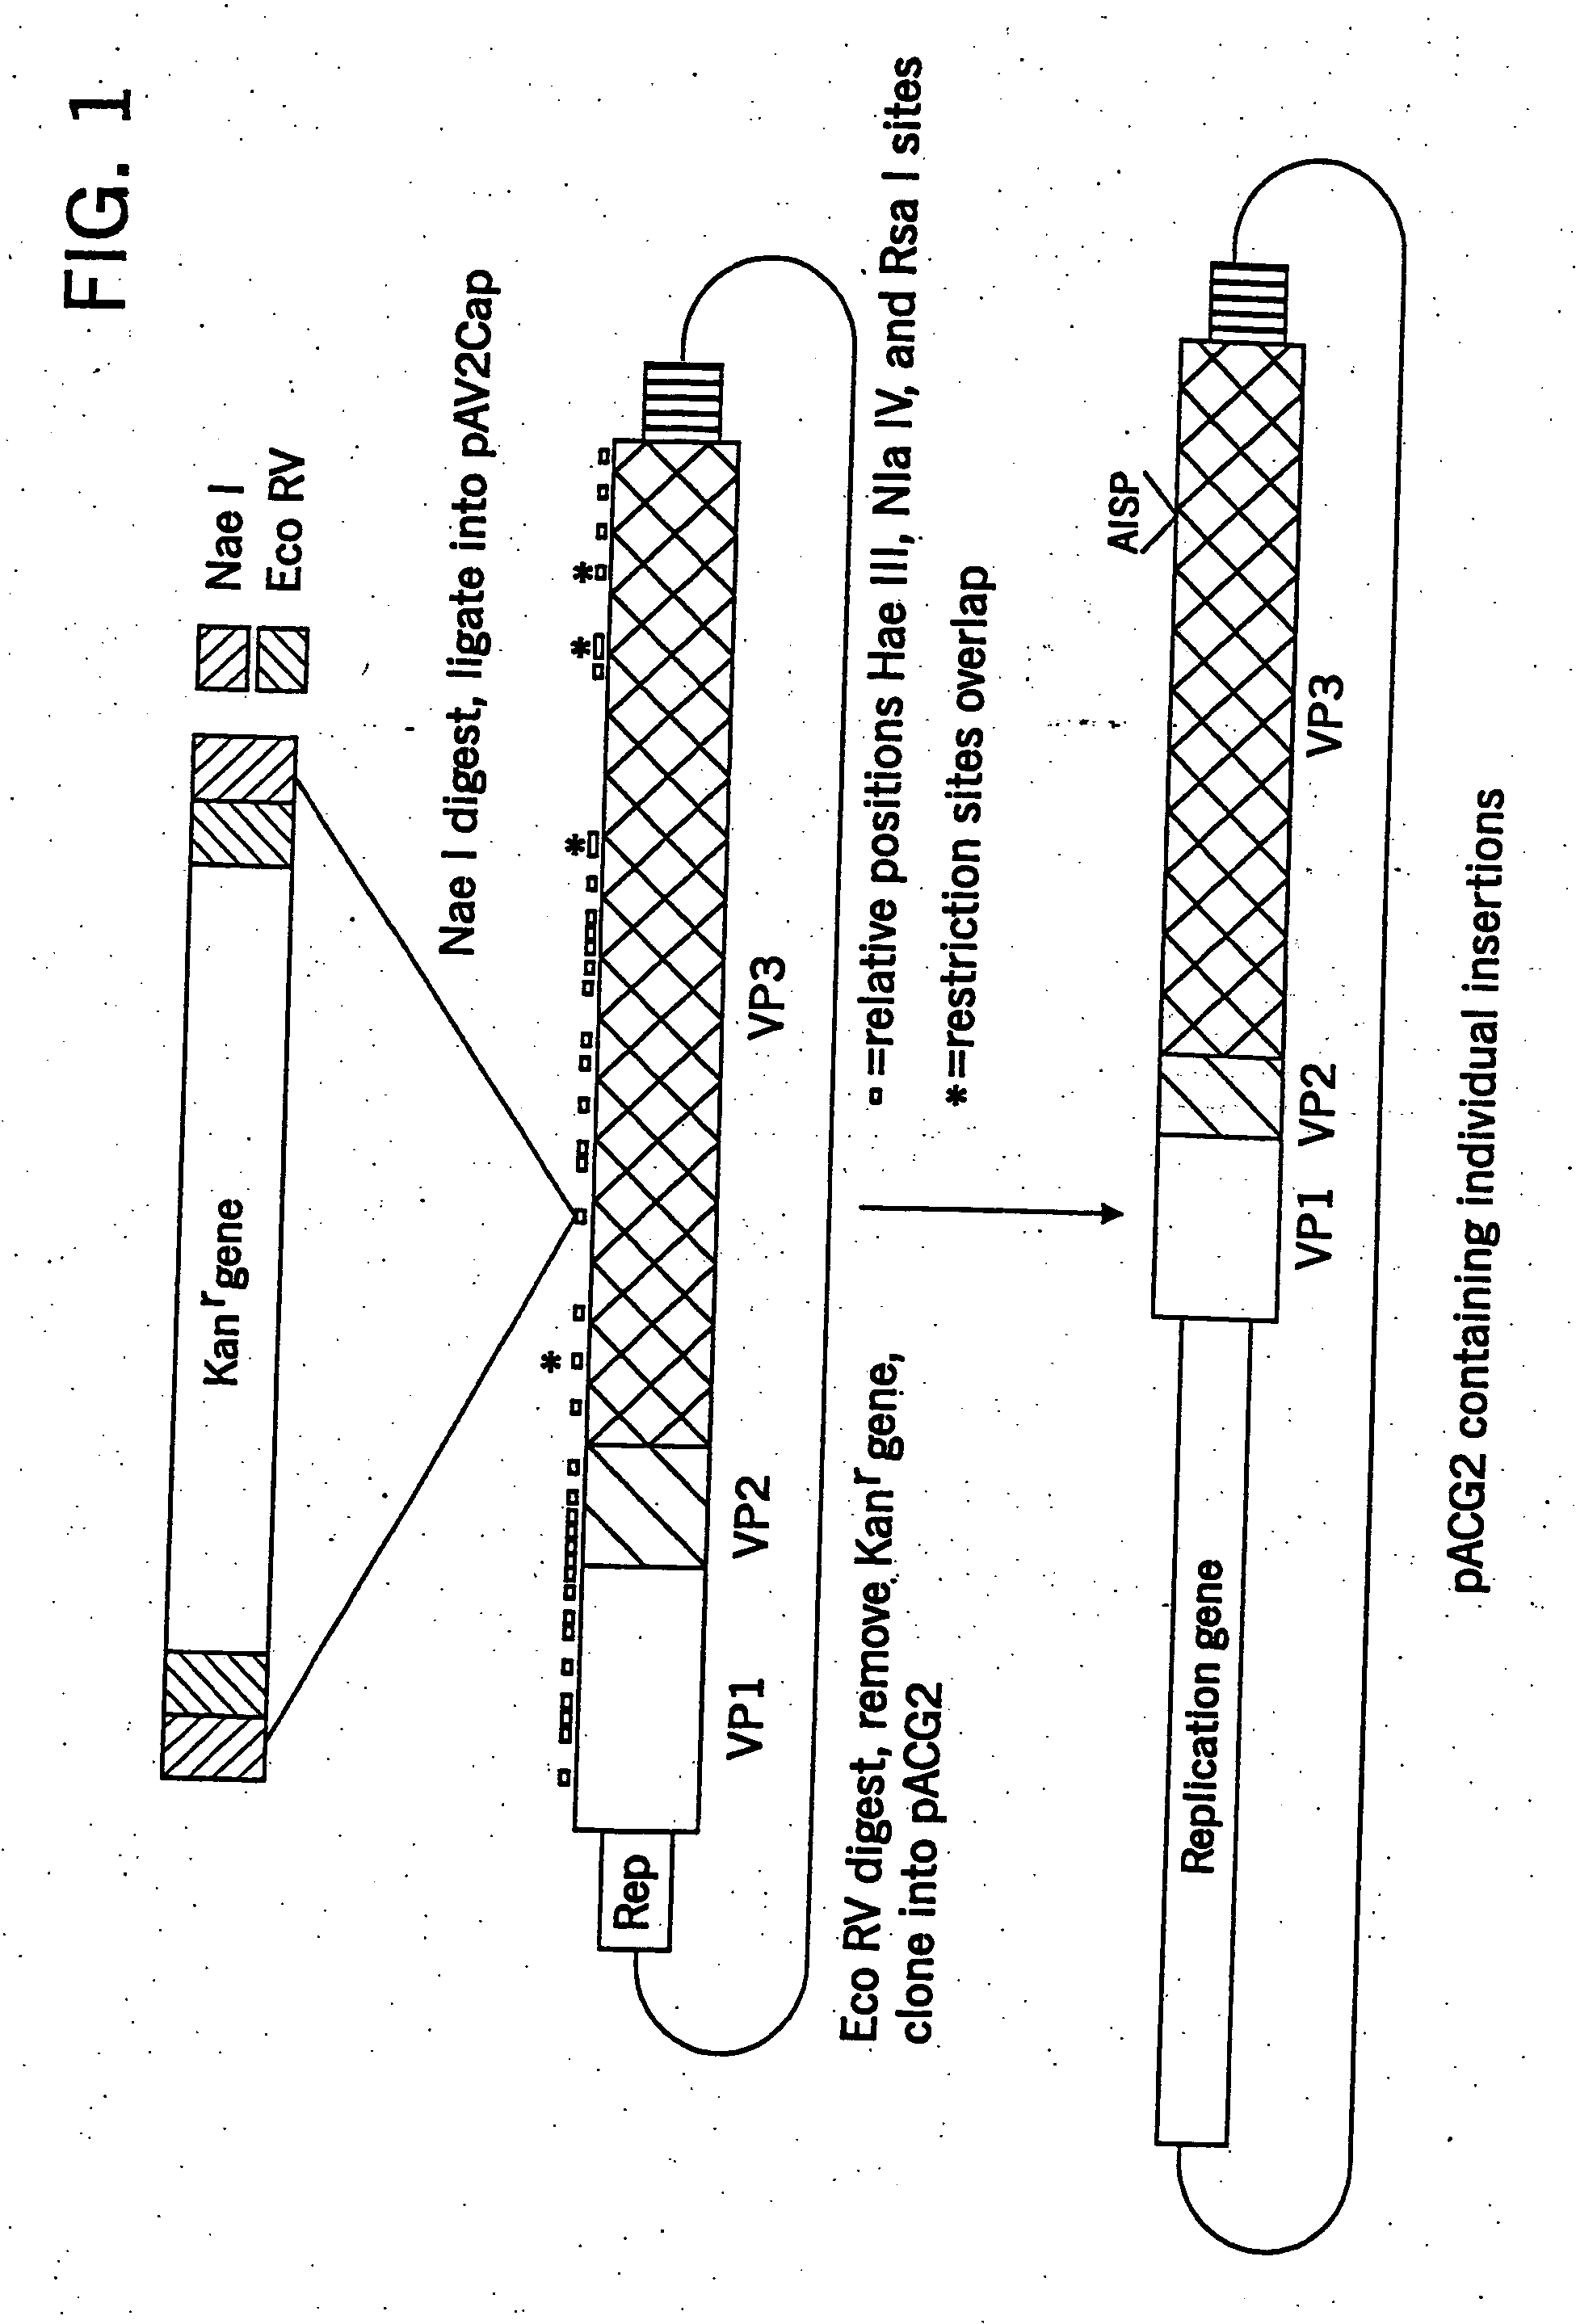 Virus vectors and methods of making and administering the same